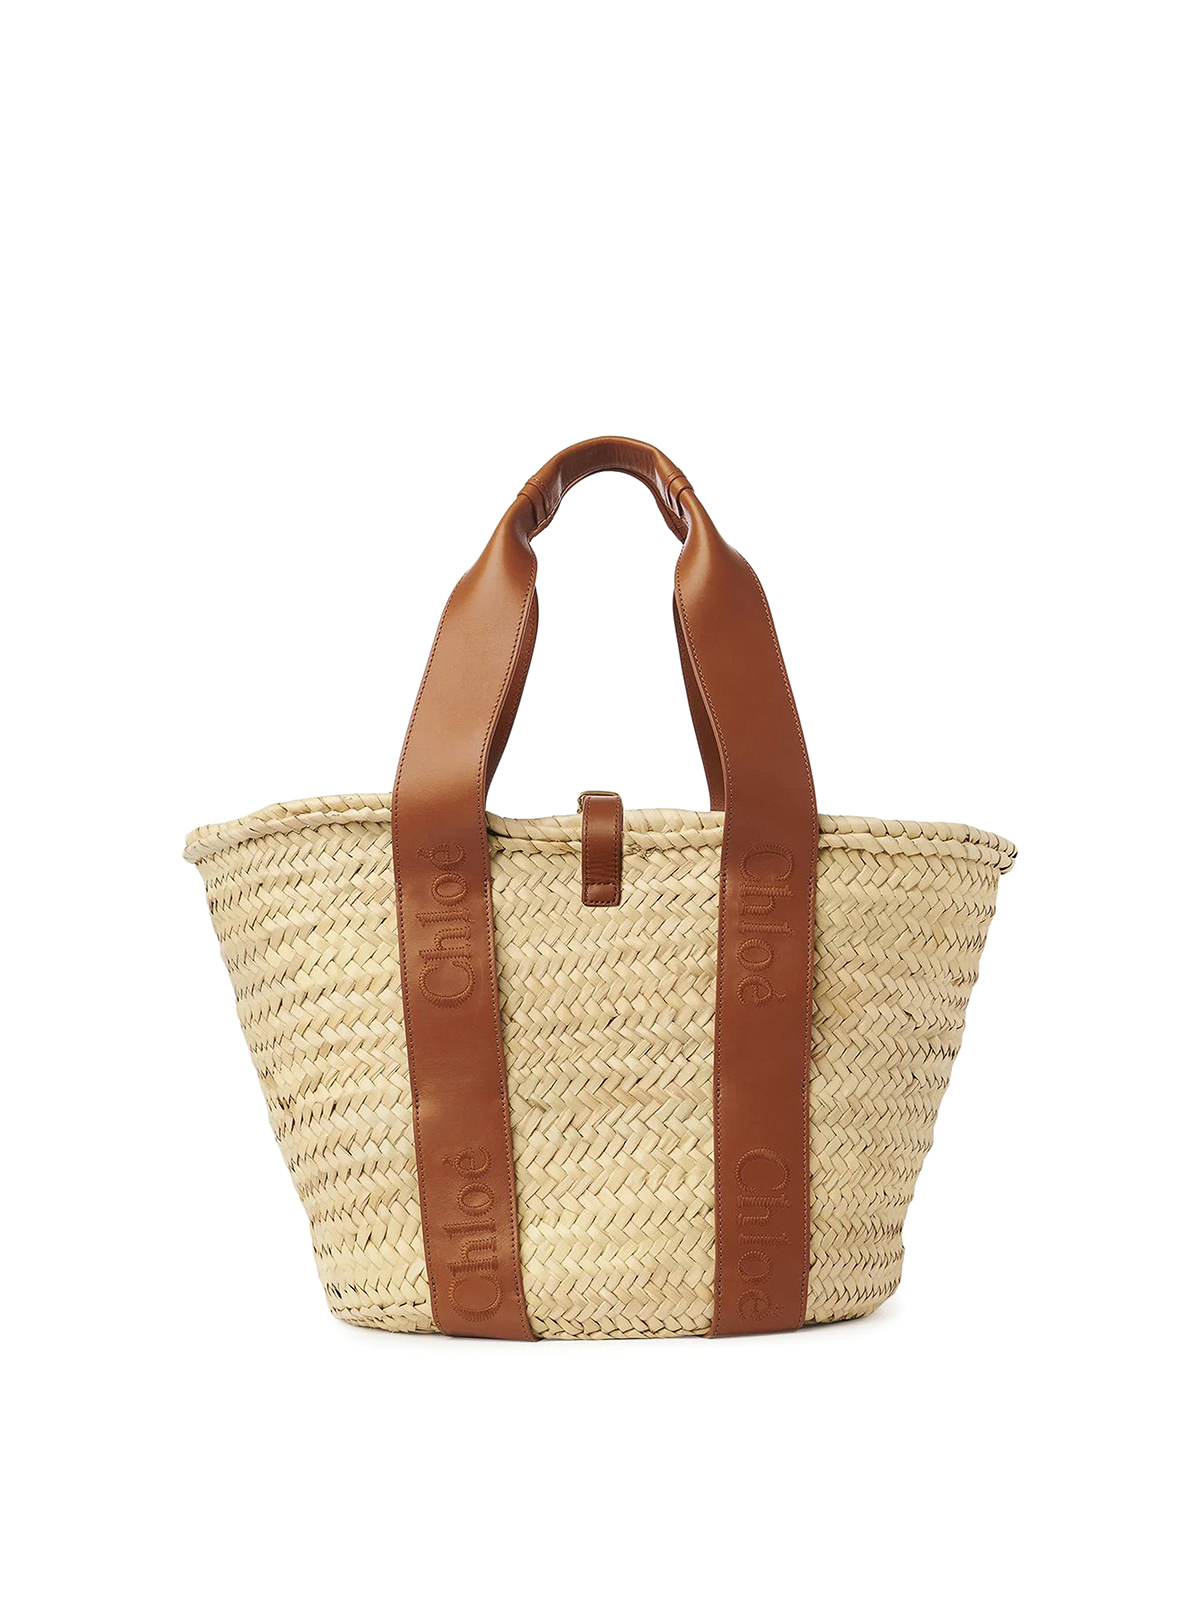 Totes bags Chloe' - Straw bag with leather handles and logo ...